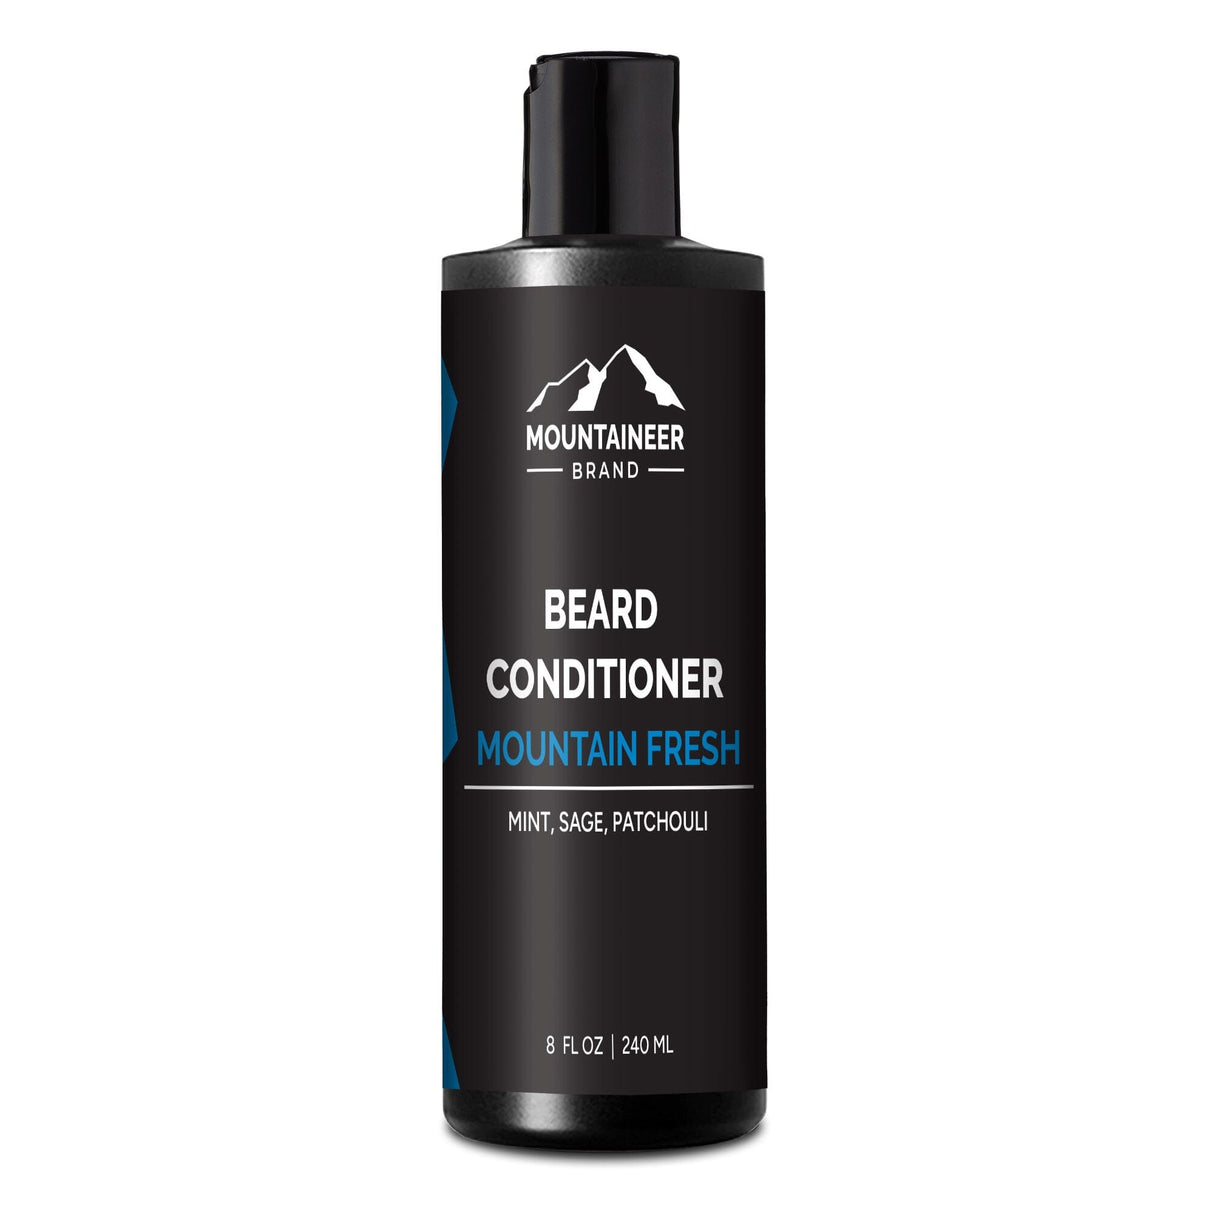 An all-natural bottle of Mountain Fresh Beard Conditioner by Mountaineer Brand Products on a white background.